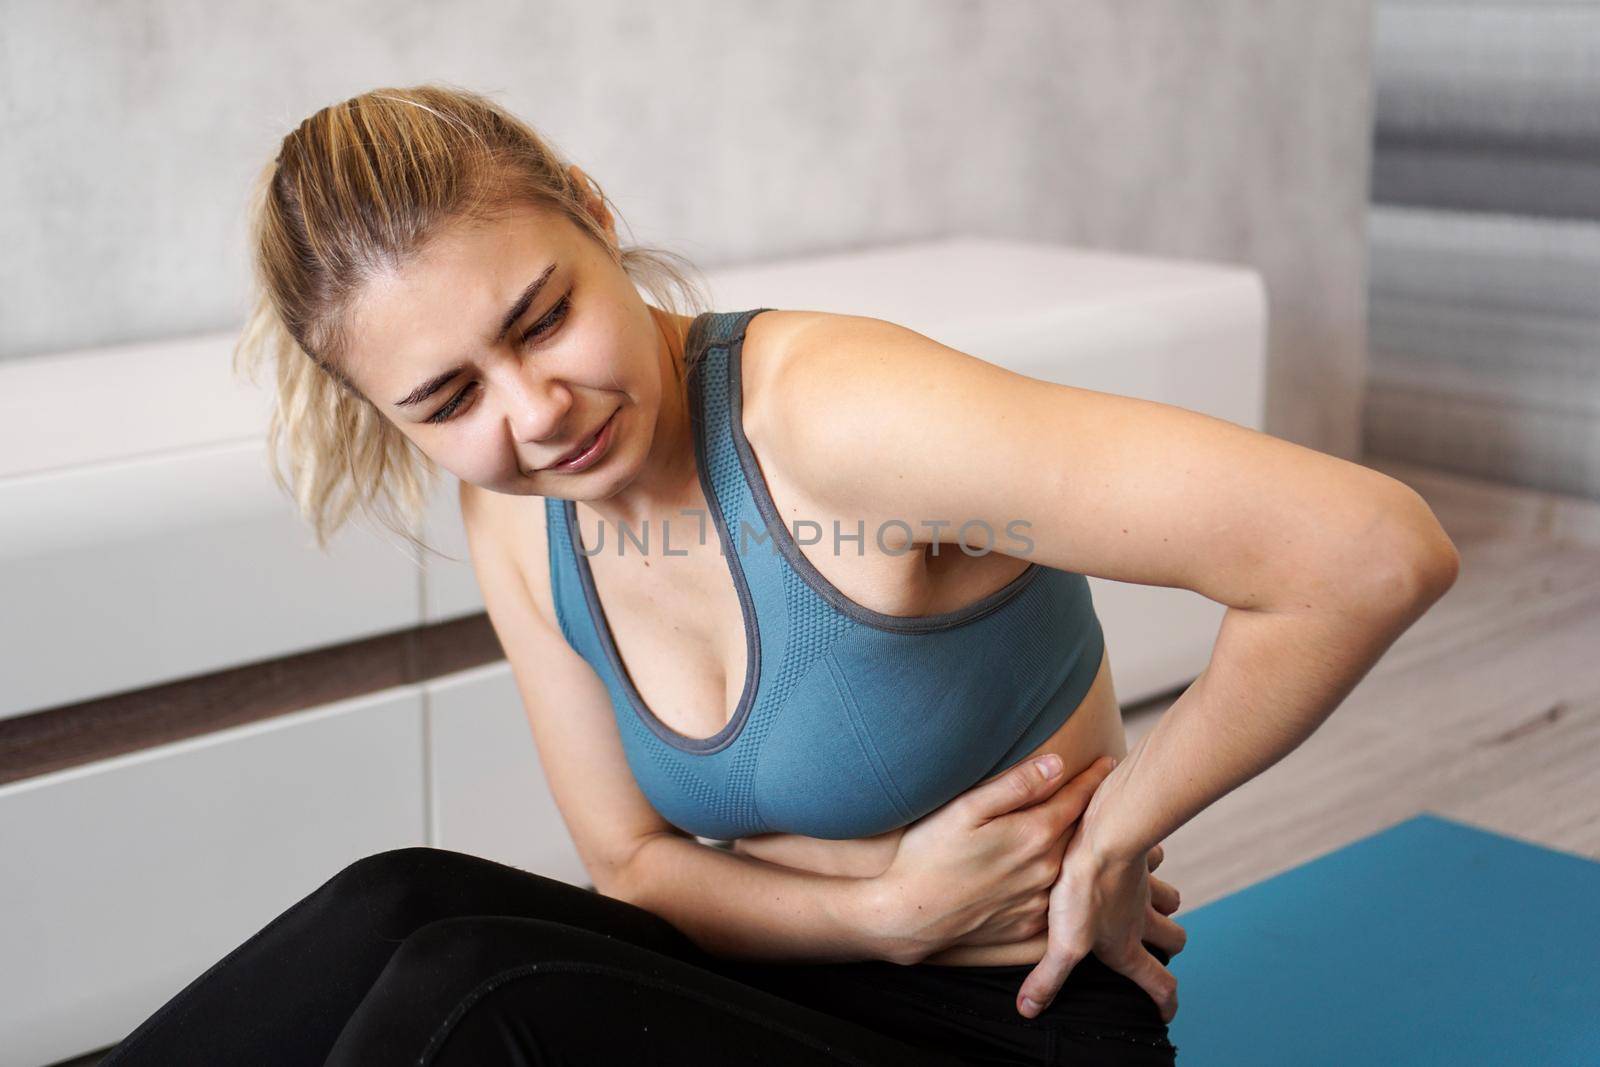 Portrait of unhappy young woman sitting on yoga mat, touching her back after training, suffering from backache, feeling pain, side view